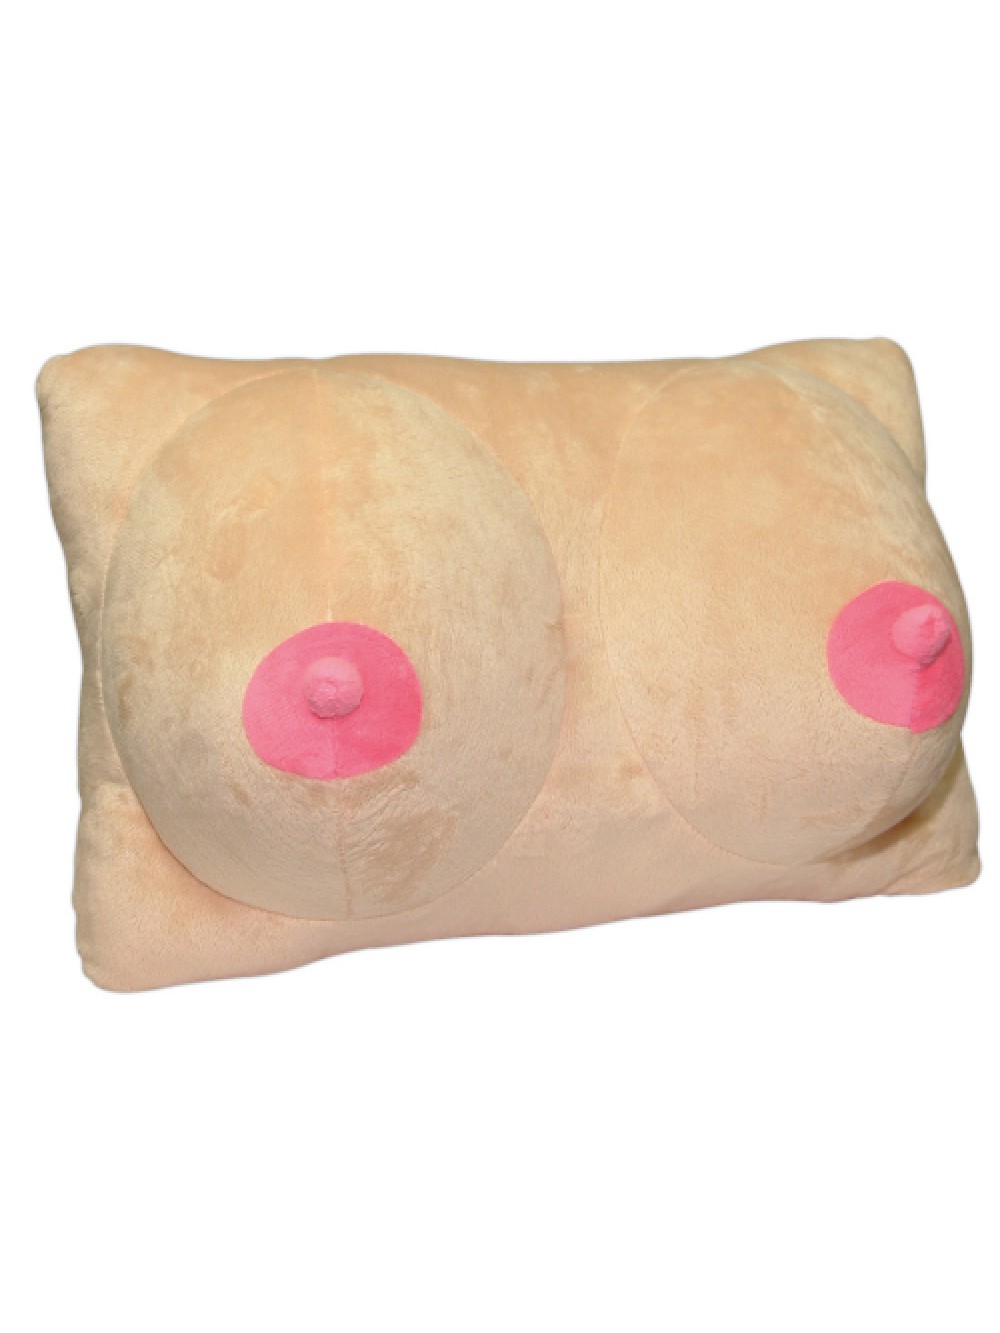 Plush Pillow Breasts 4024144772520